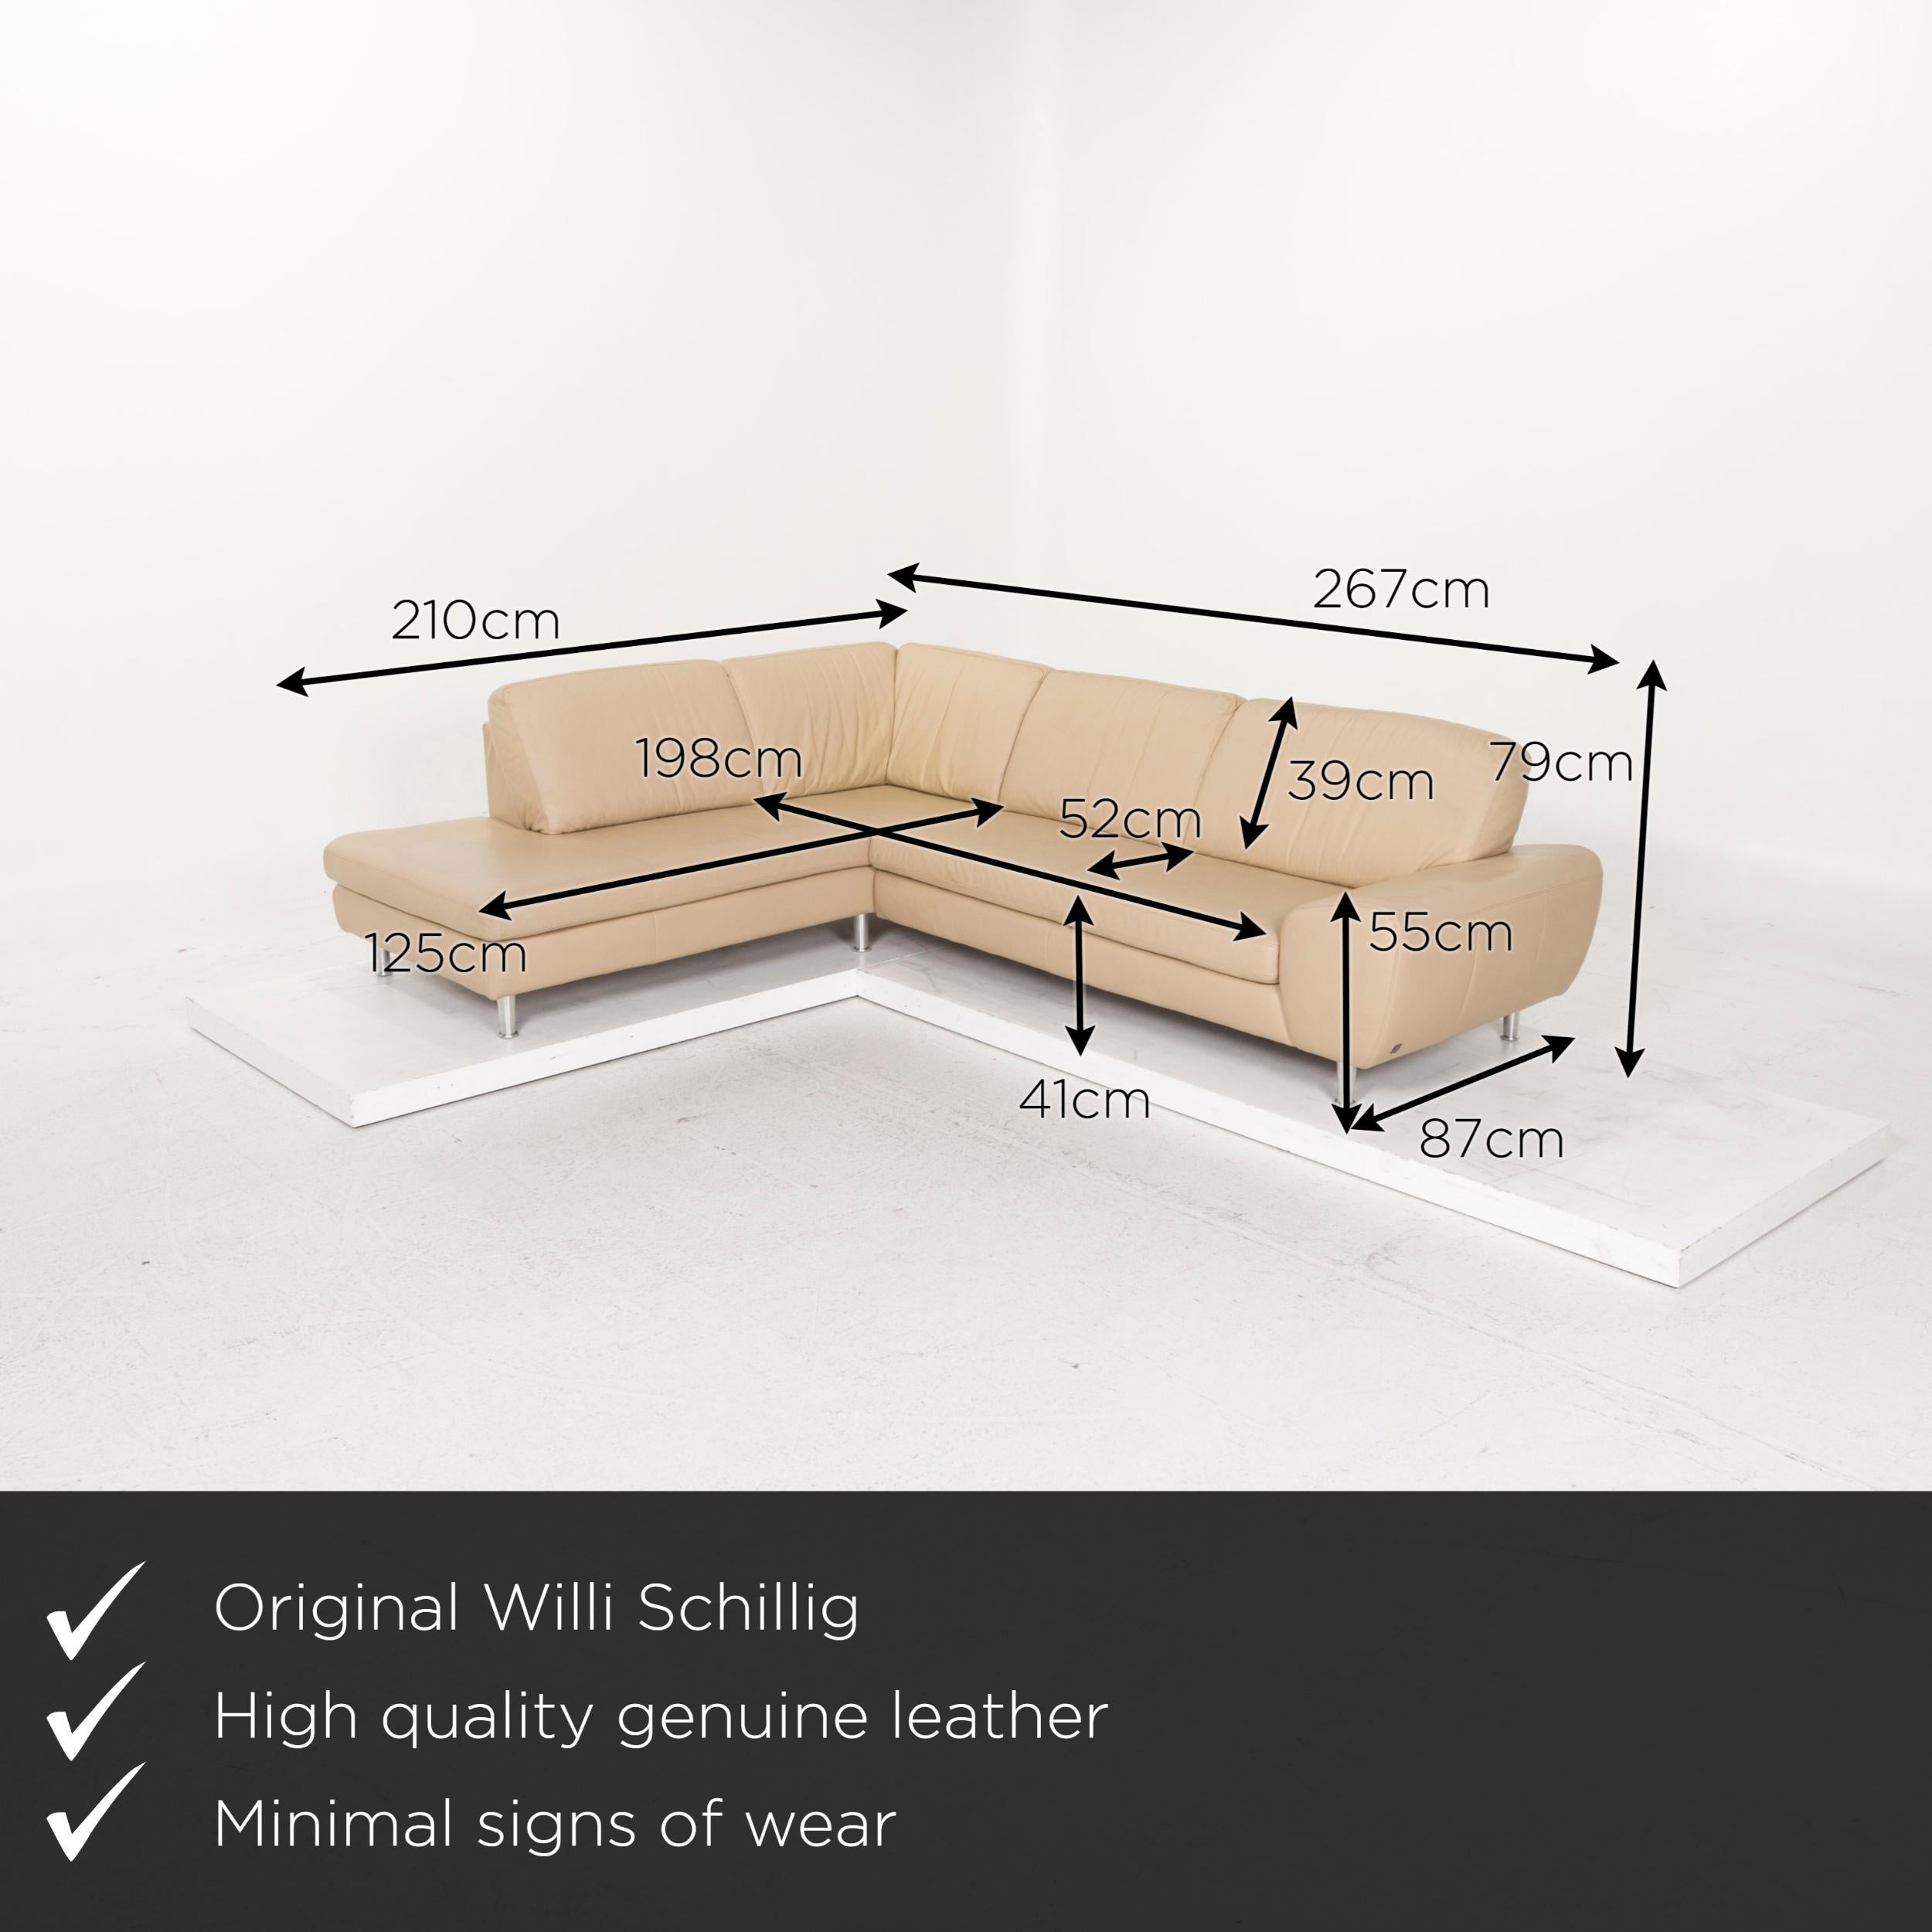 We present to you a Willi Schillig leather sofa beige corner sofa.

 

 Product measurements in centimeters:
 

Depth 87
Width 210
Height 79
Seat height 41
Rest height 55
Seat depth 52
Seat width 125
Back height 39.
  